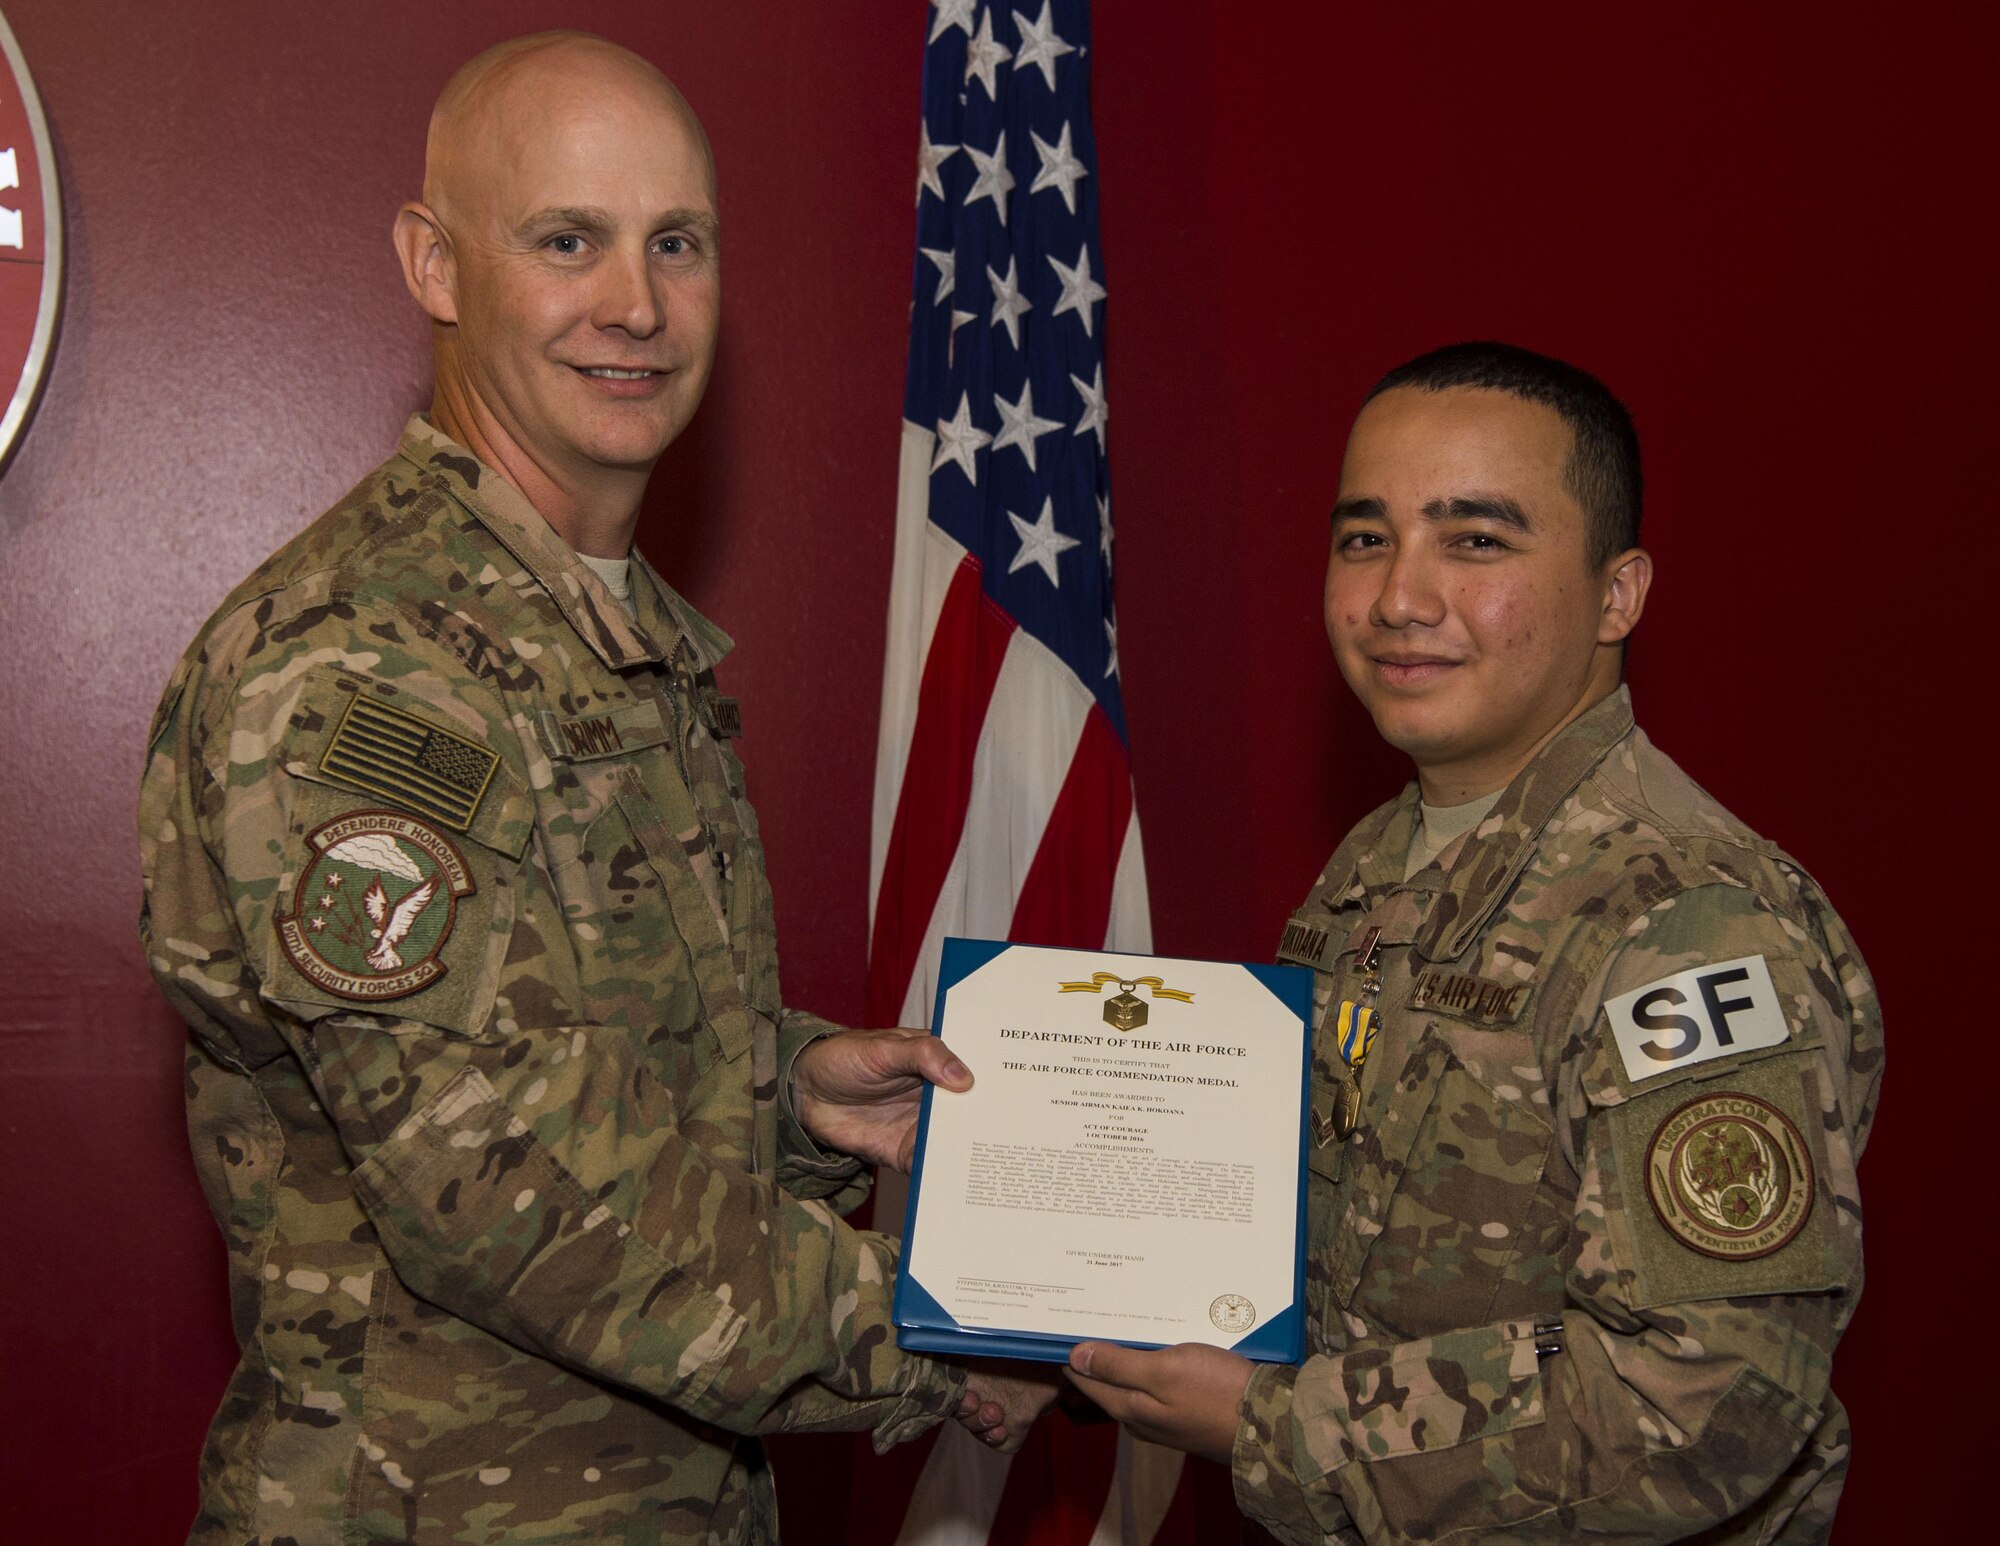 Col. John Grimm, 90th Security Forces Group commander, presents Senior Airman Kaiea Hokoana, 90th Security Forces Squadron installation patrolman, with the Air Force Commendation Medal in Cheyenne, Wyo., July 14, 2017. Hokoana received this medal for his role in providing first responder assistance which contributed to saving a motorist’s life on Oct. 1, 2016 while on leave in Maui, Hawaii. (U.S. Air Force photo by Staff Sgt. Christopher Ruano)